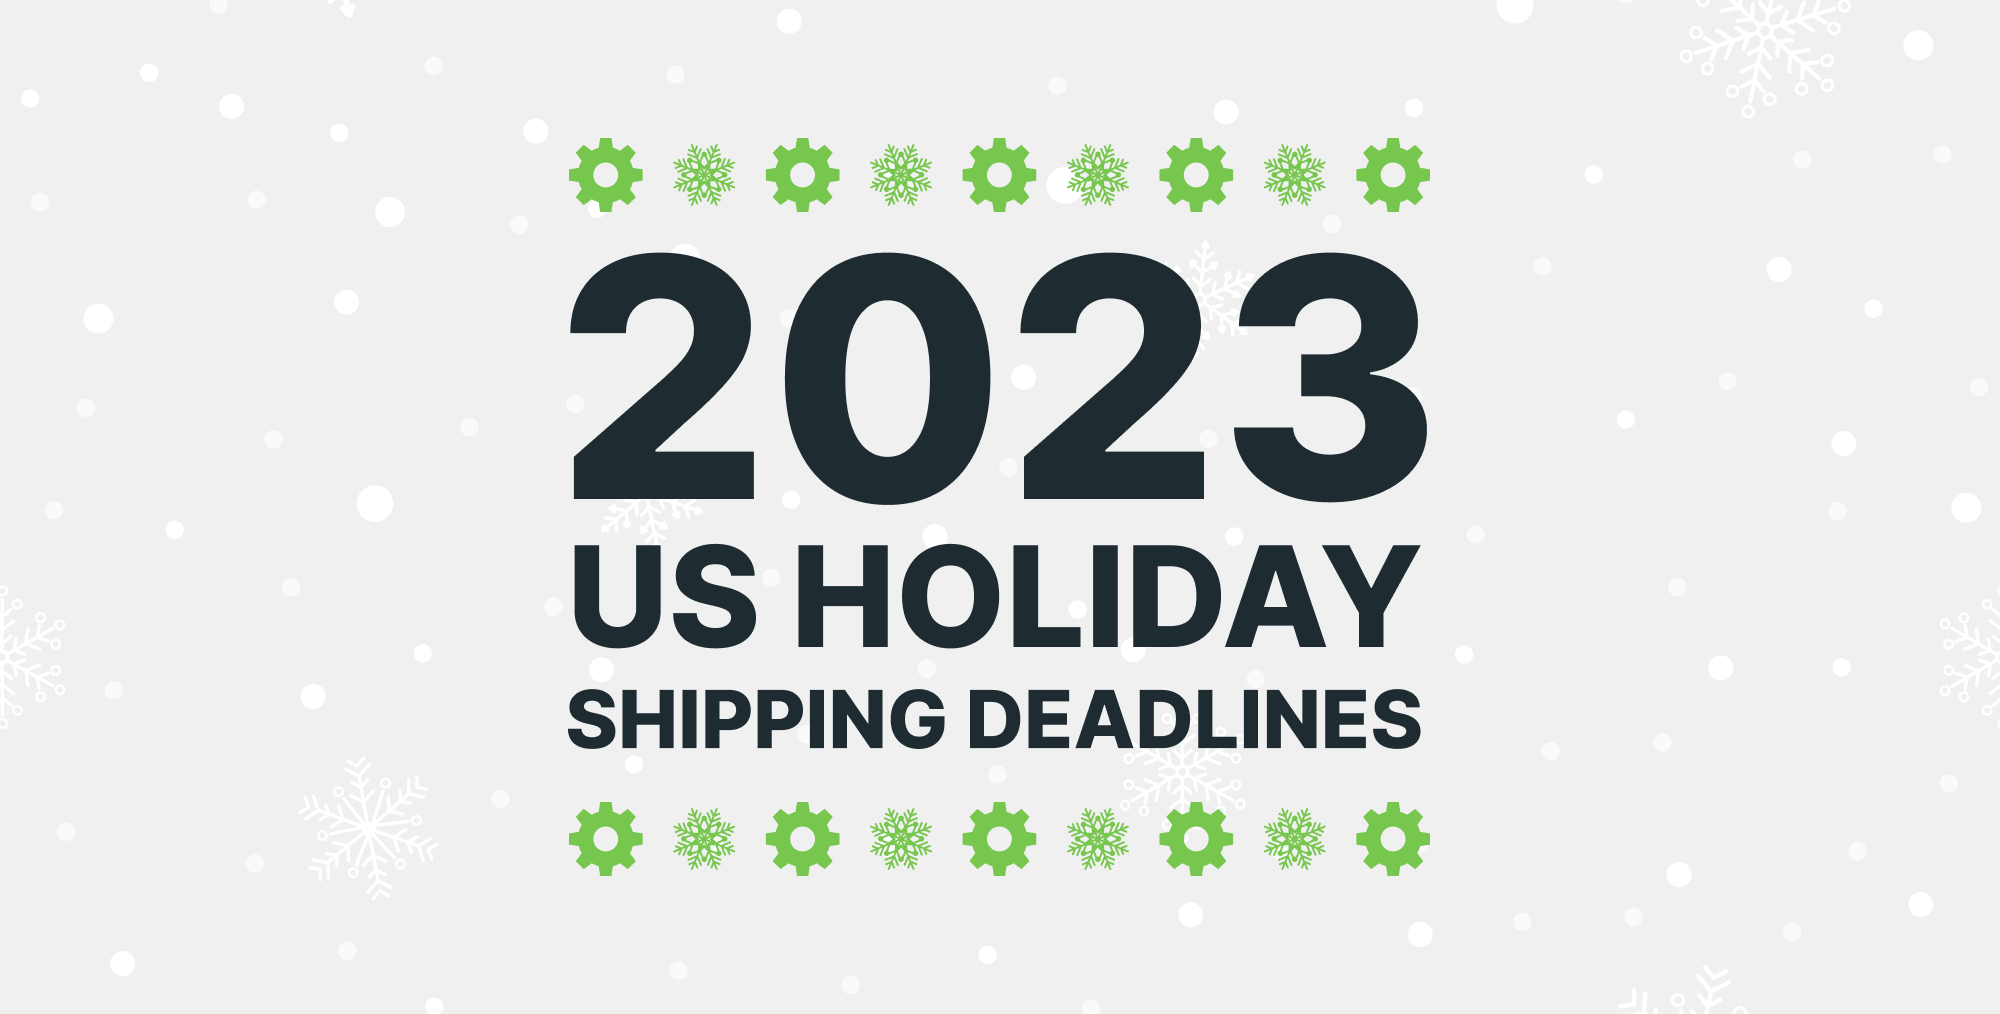 When is the  Prime shipping deadline for Christmas 2023? The